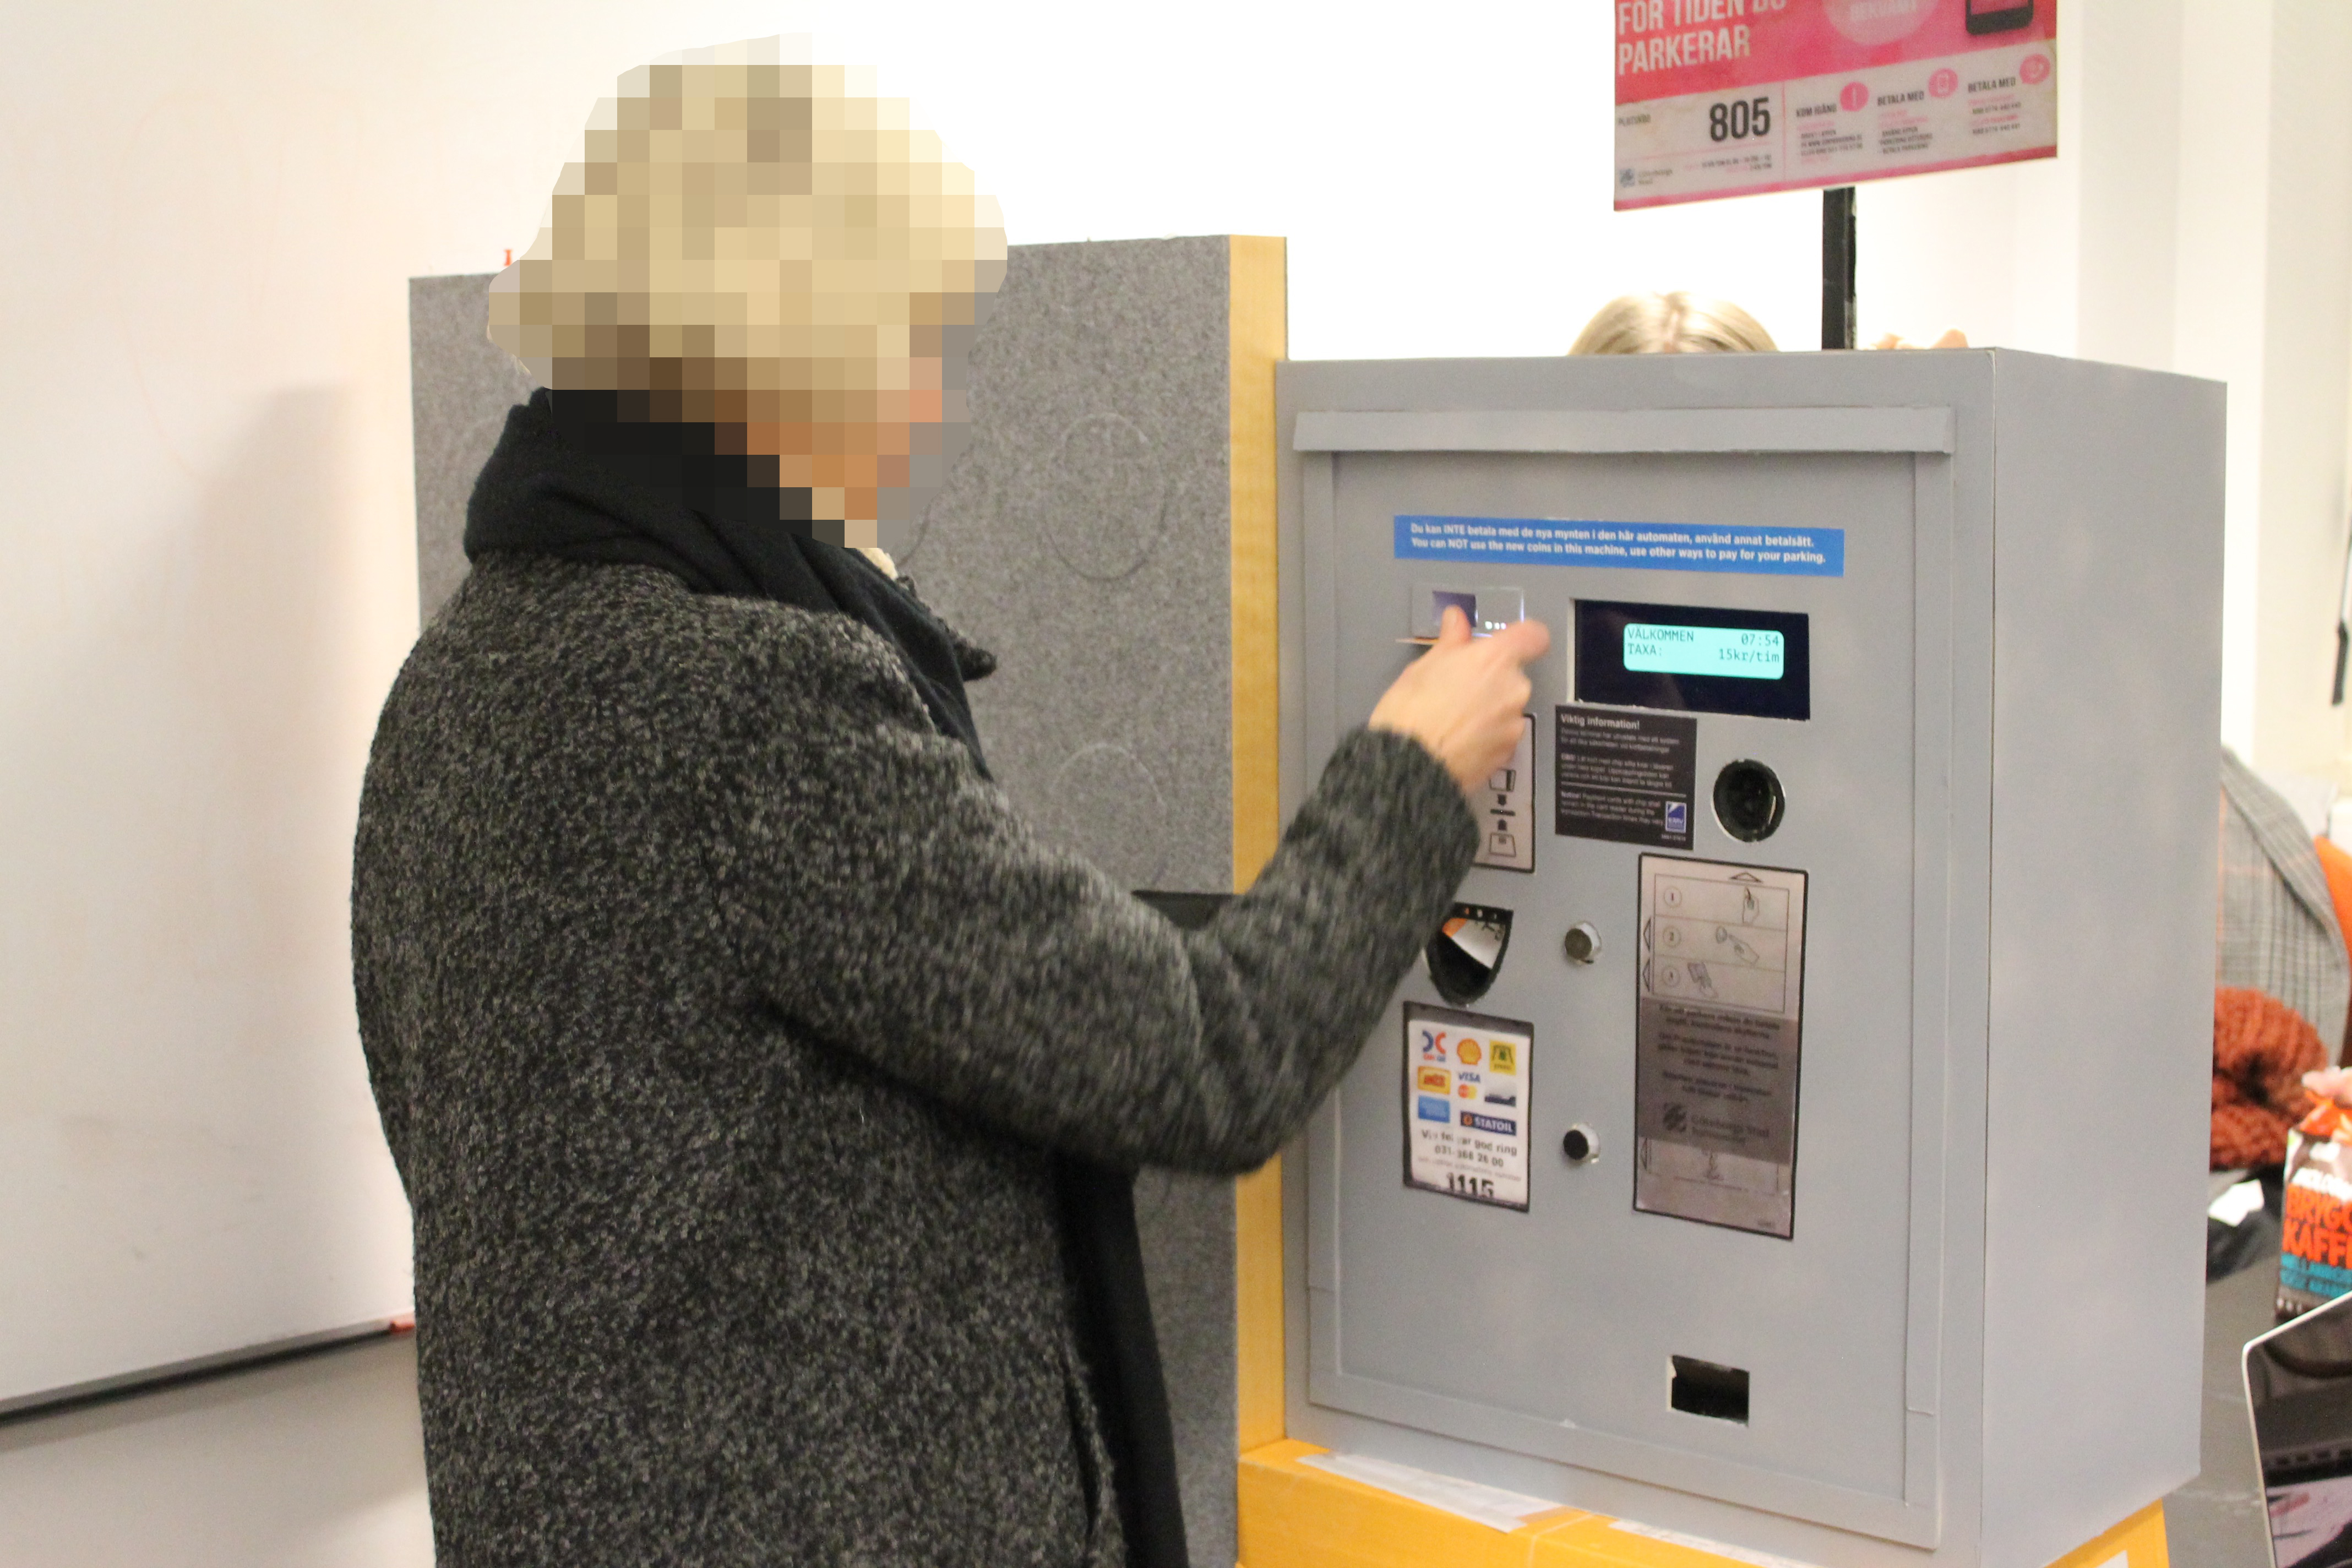 A woman participating in a user test doing tasks at the parking meter